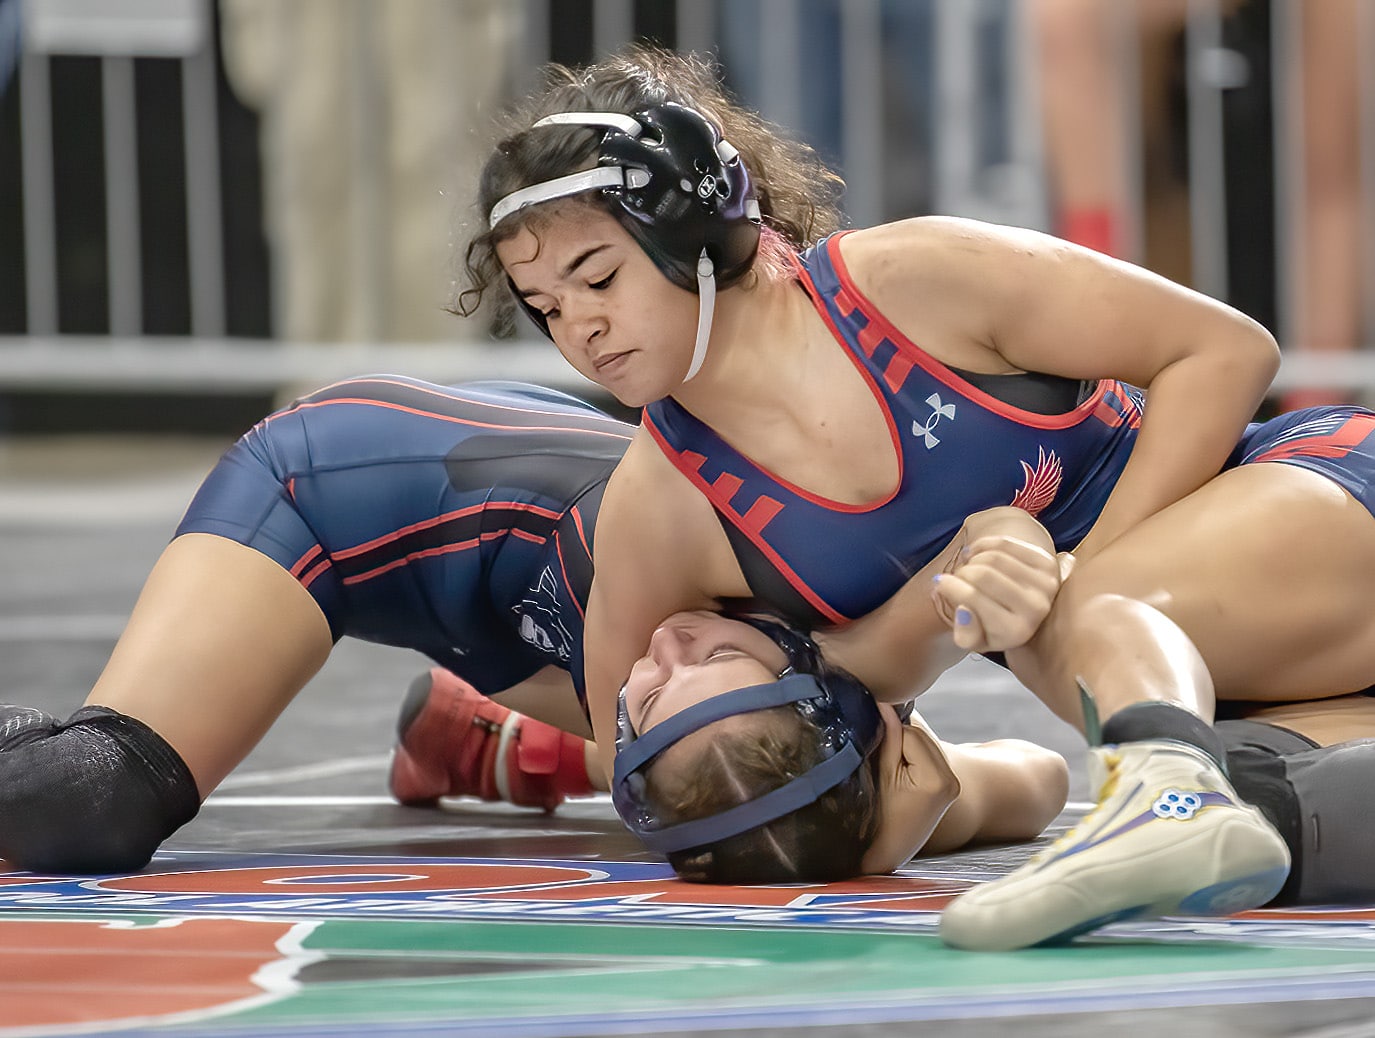 Springstead High’s 115-pound competitor, Emma Bauknight, defeated Florida Christian School’s Isabella Garcia pinning her in the first round of a consolation match at the FHSAA IBT Championships in Kissimmee. Photo by JOE DiCRISTOFALO